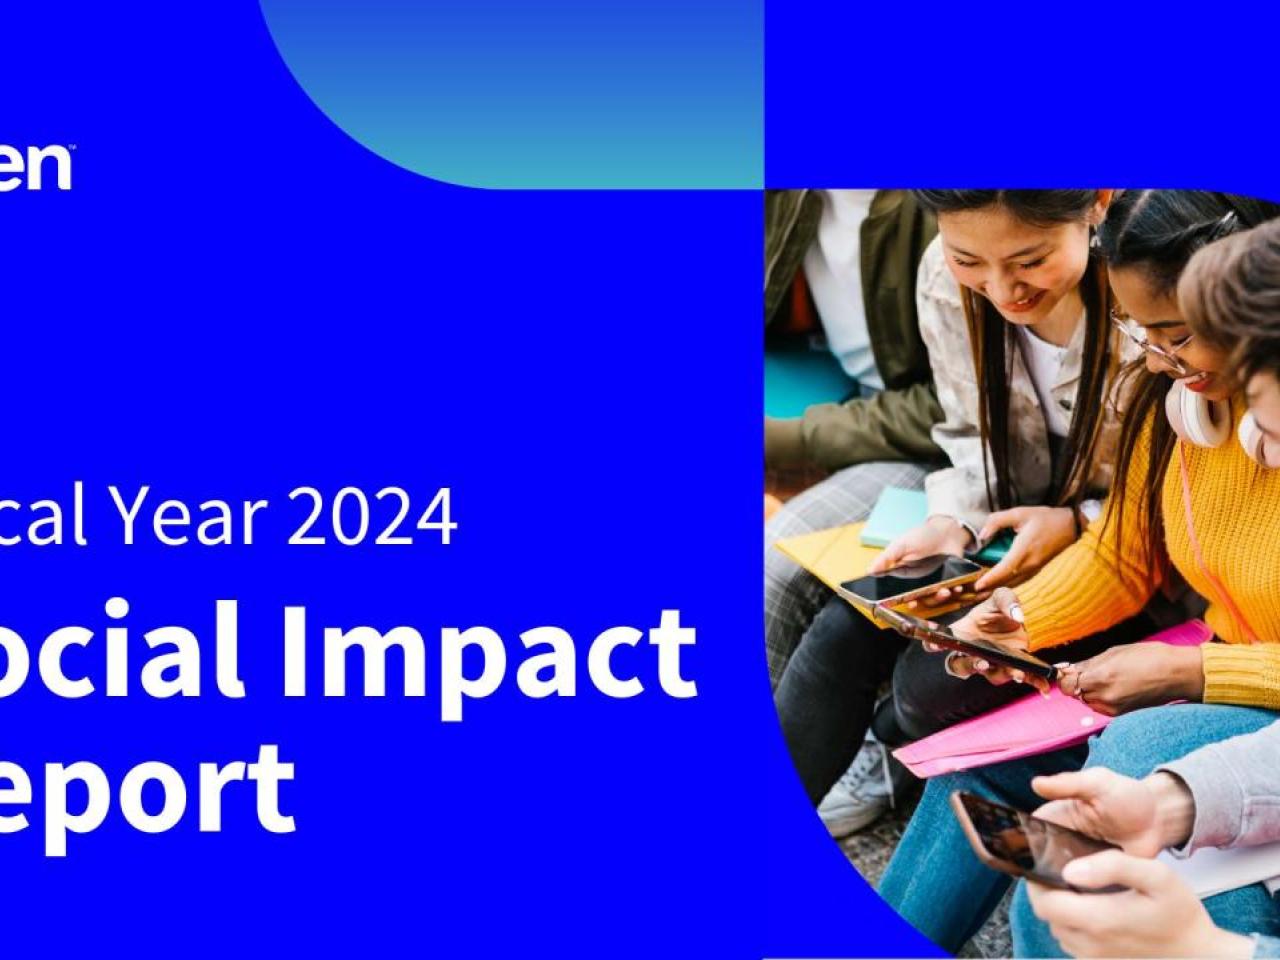 Gen Fiscal Year 2024 Social Impact Report cover